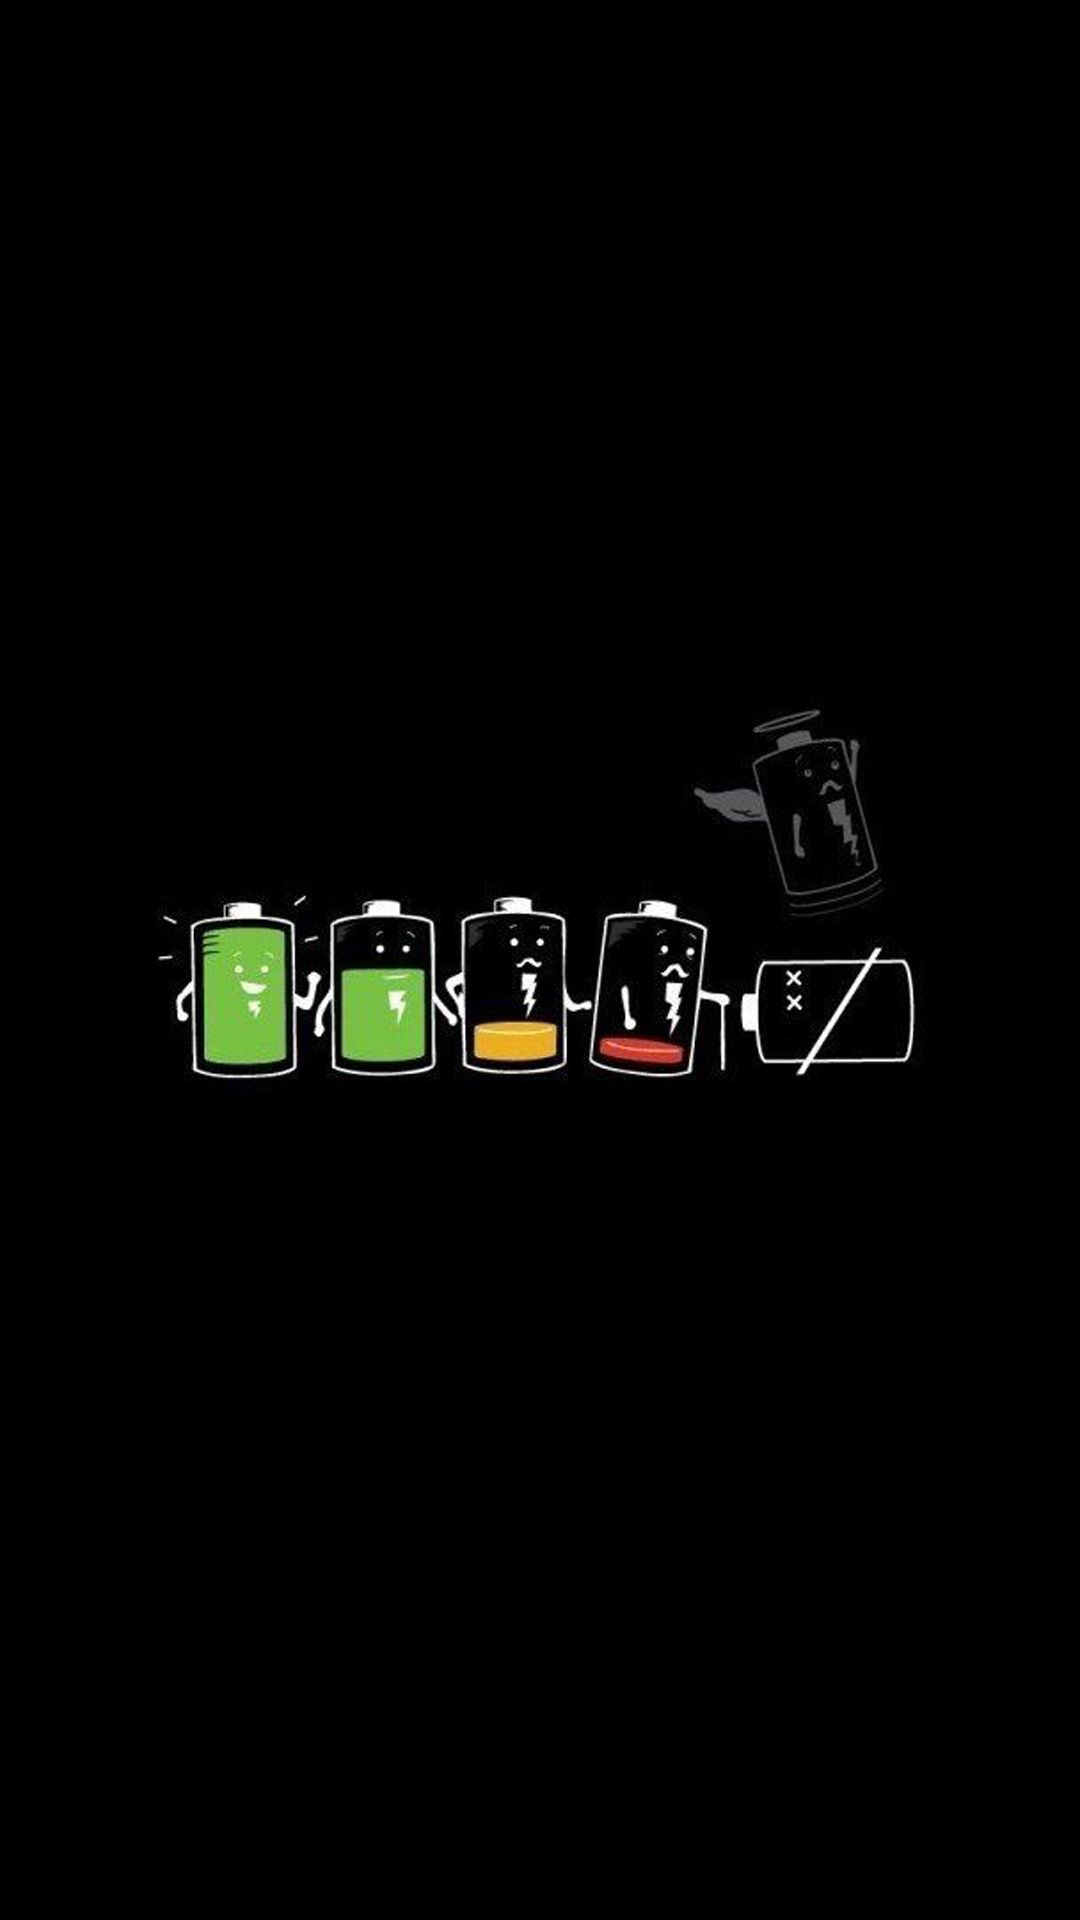 The Battery Life Funny Cartoon Art iPhone Wallpaper Tap To See